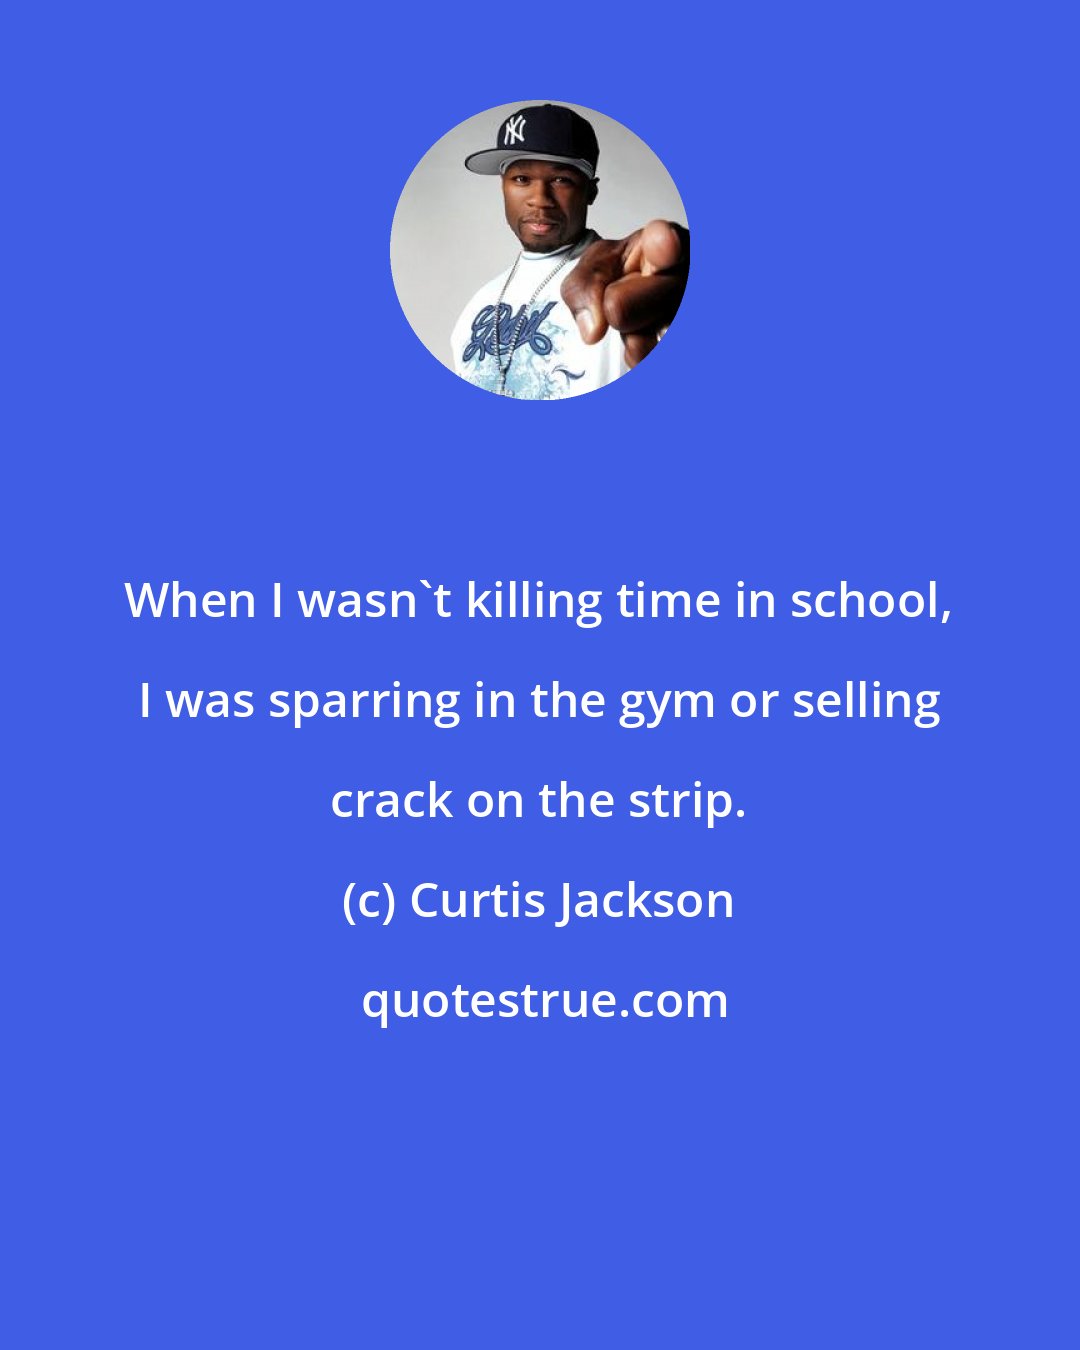 Curtis Jackson: When I wasn't killing time in school, I was sparring in the gym or selling crack on the strip.